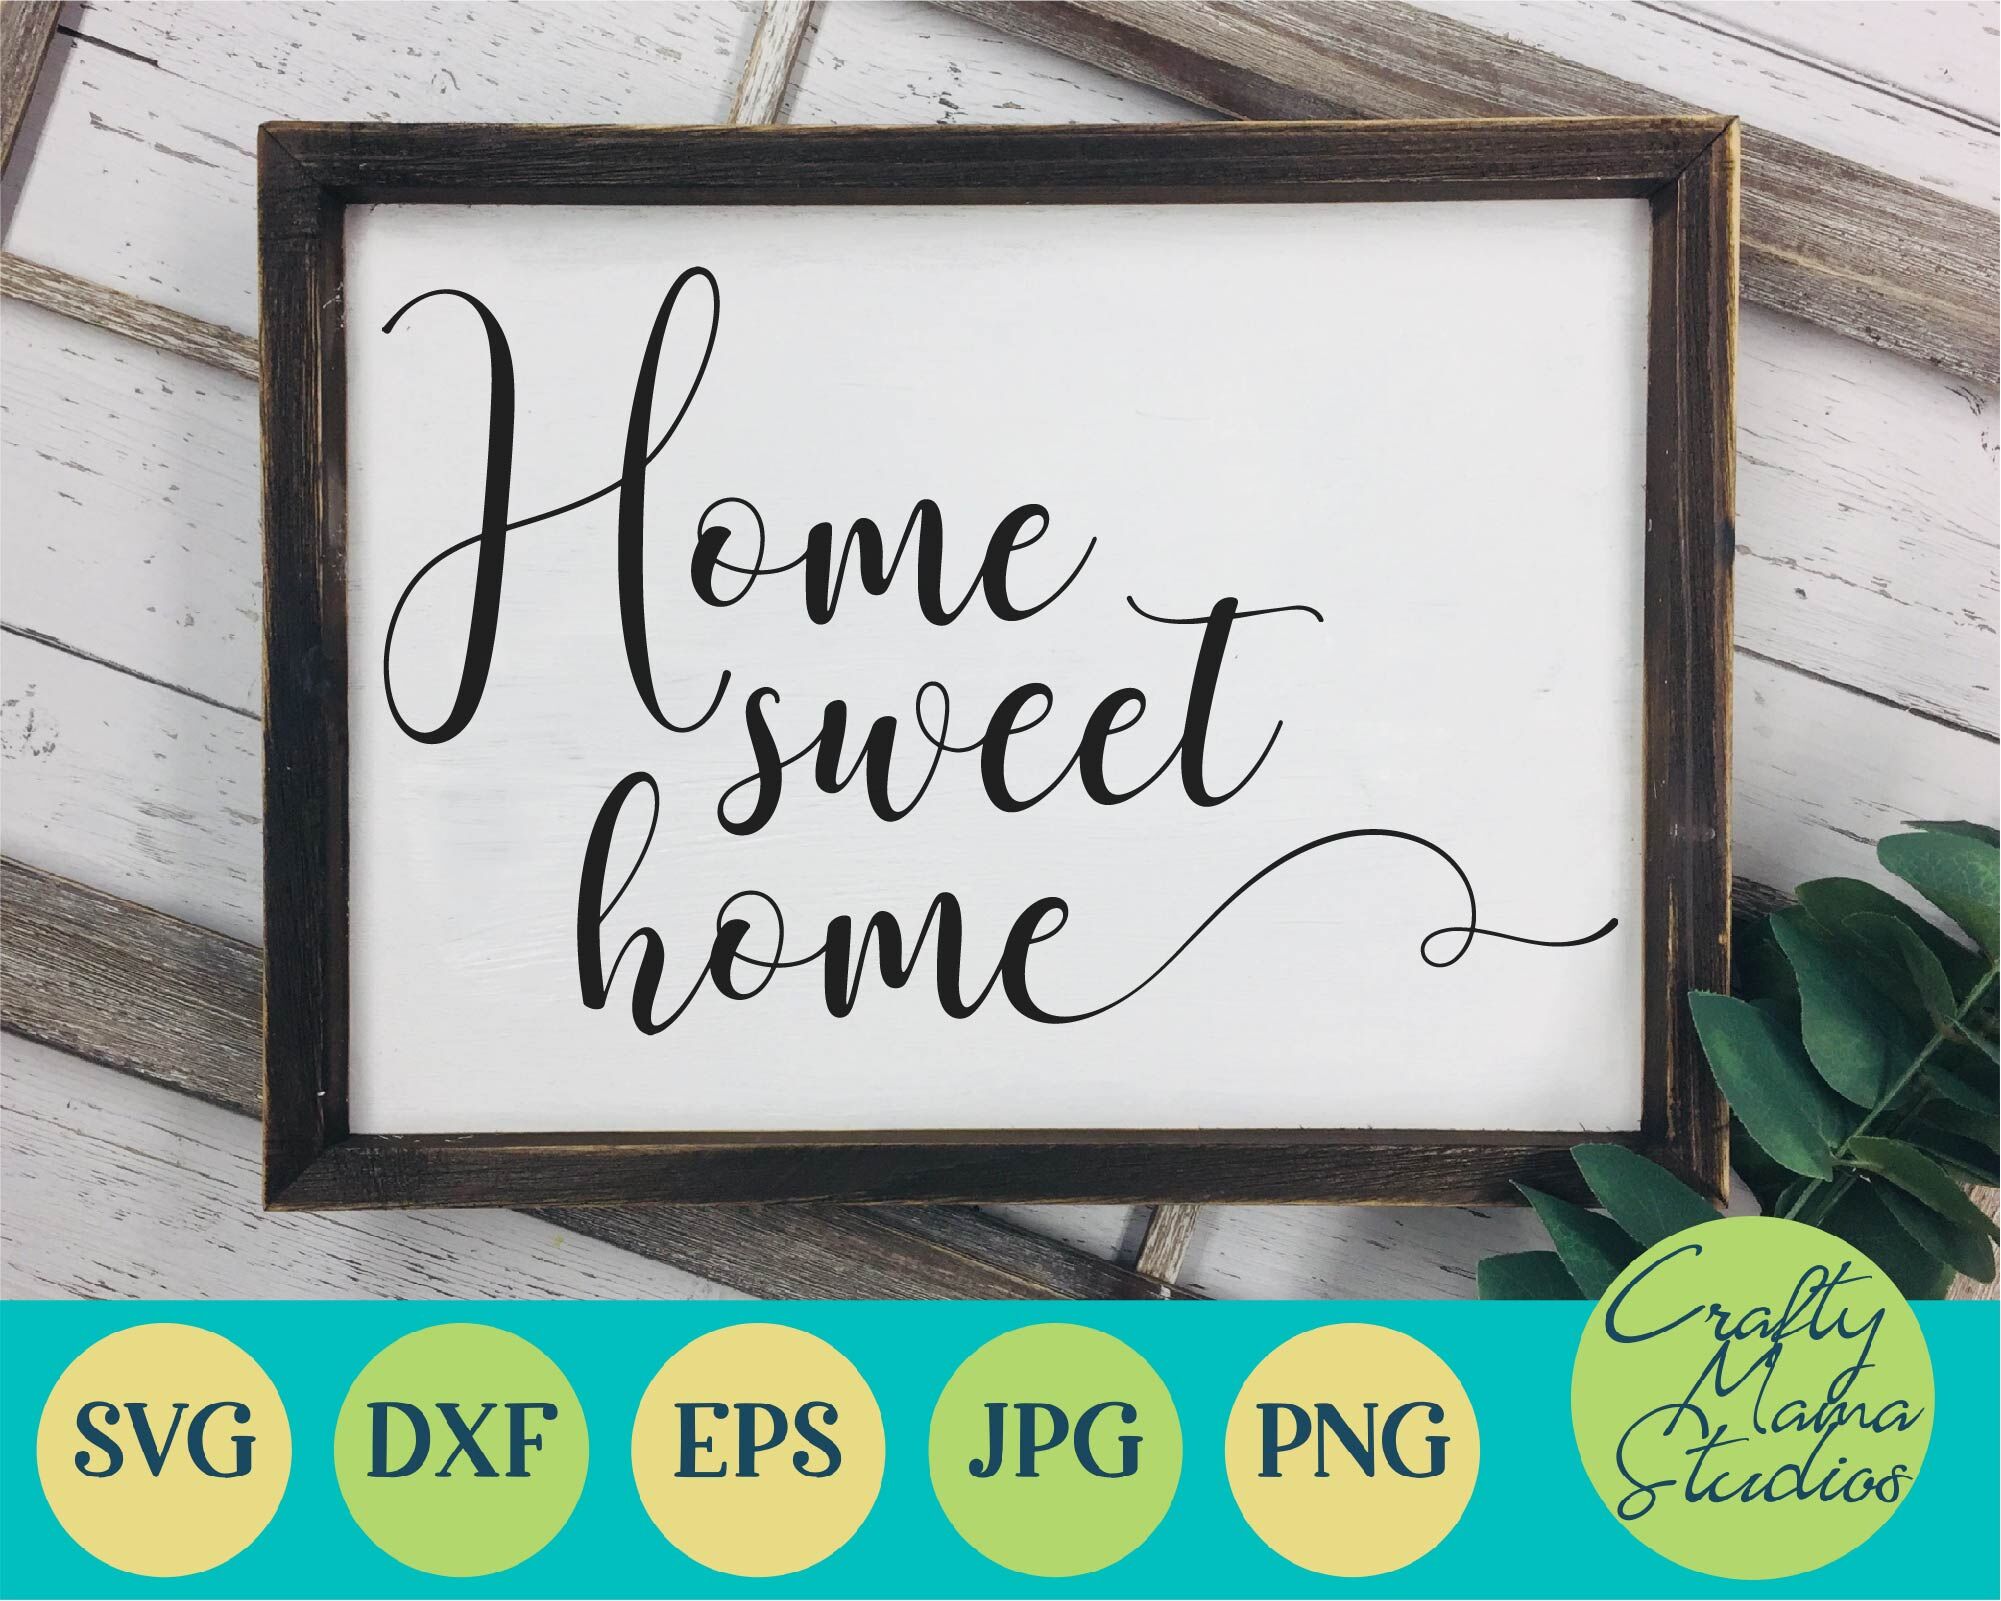 Download Home Sweet Home Svg Family Svg Love Svg Home Svg By Crafty Mama Studios Thehungryjpeg Com